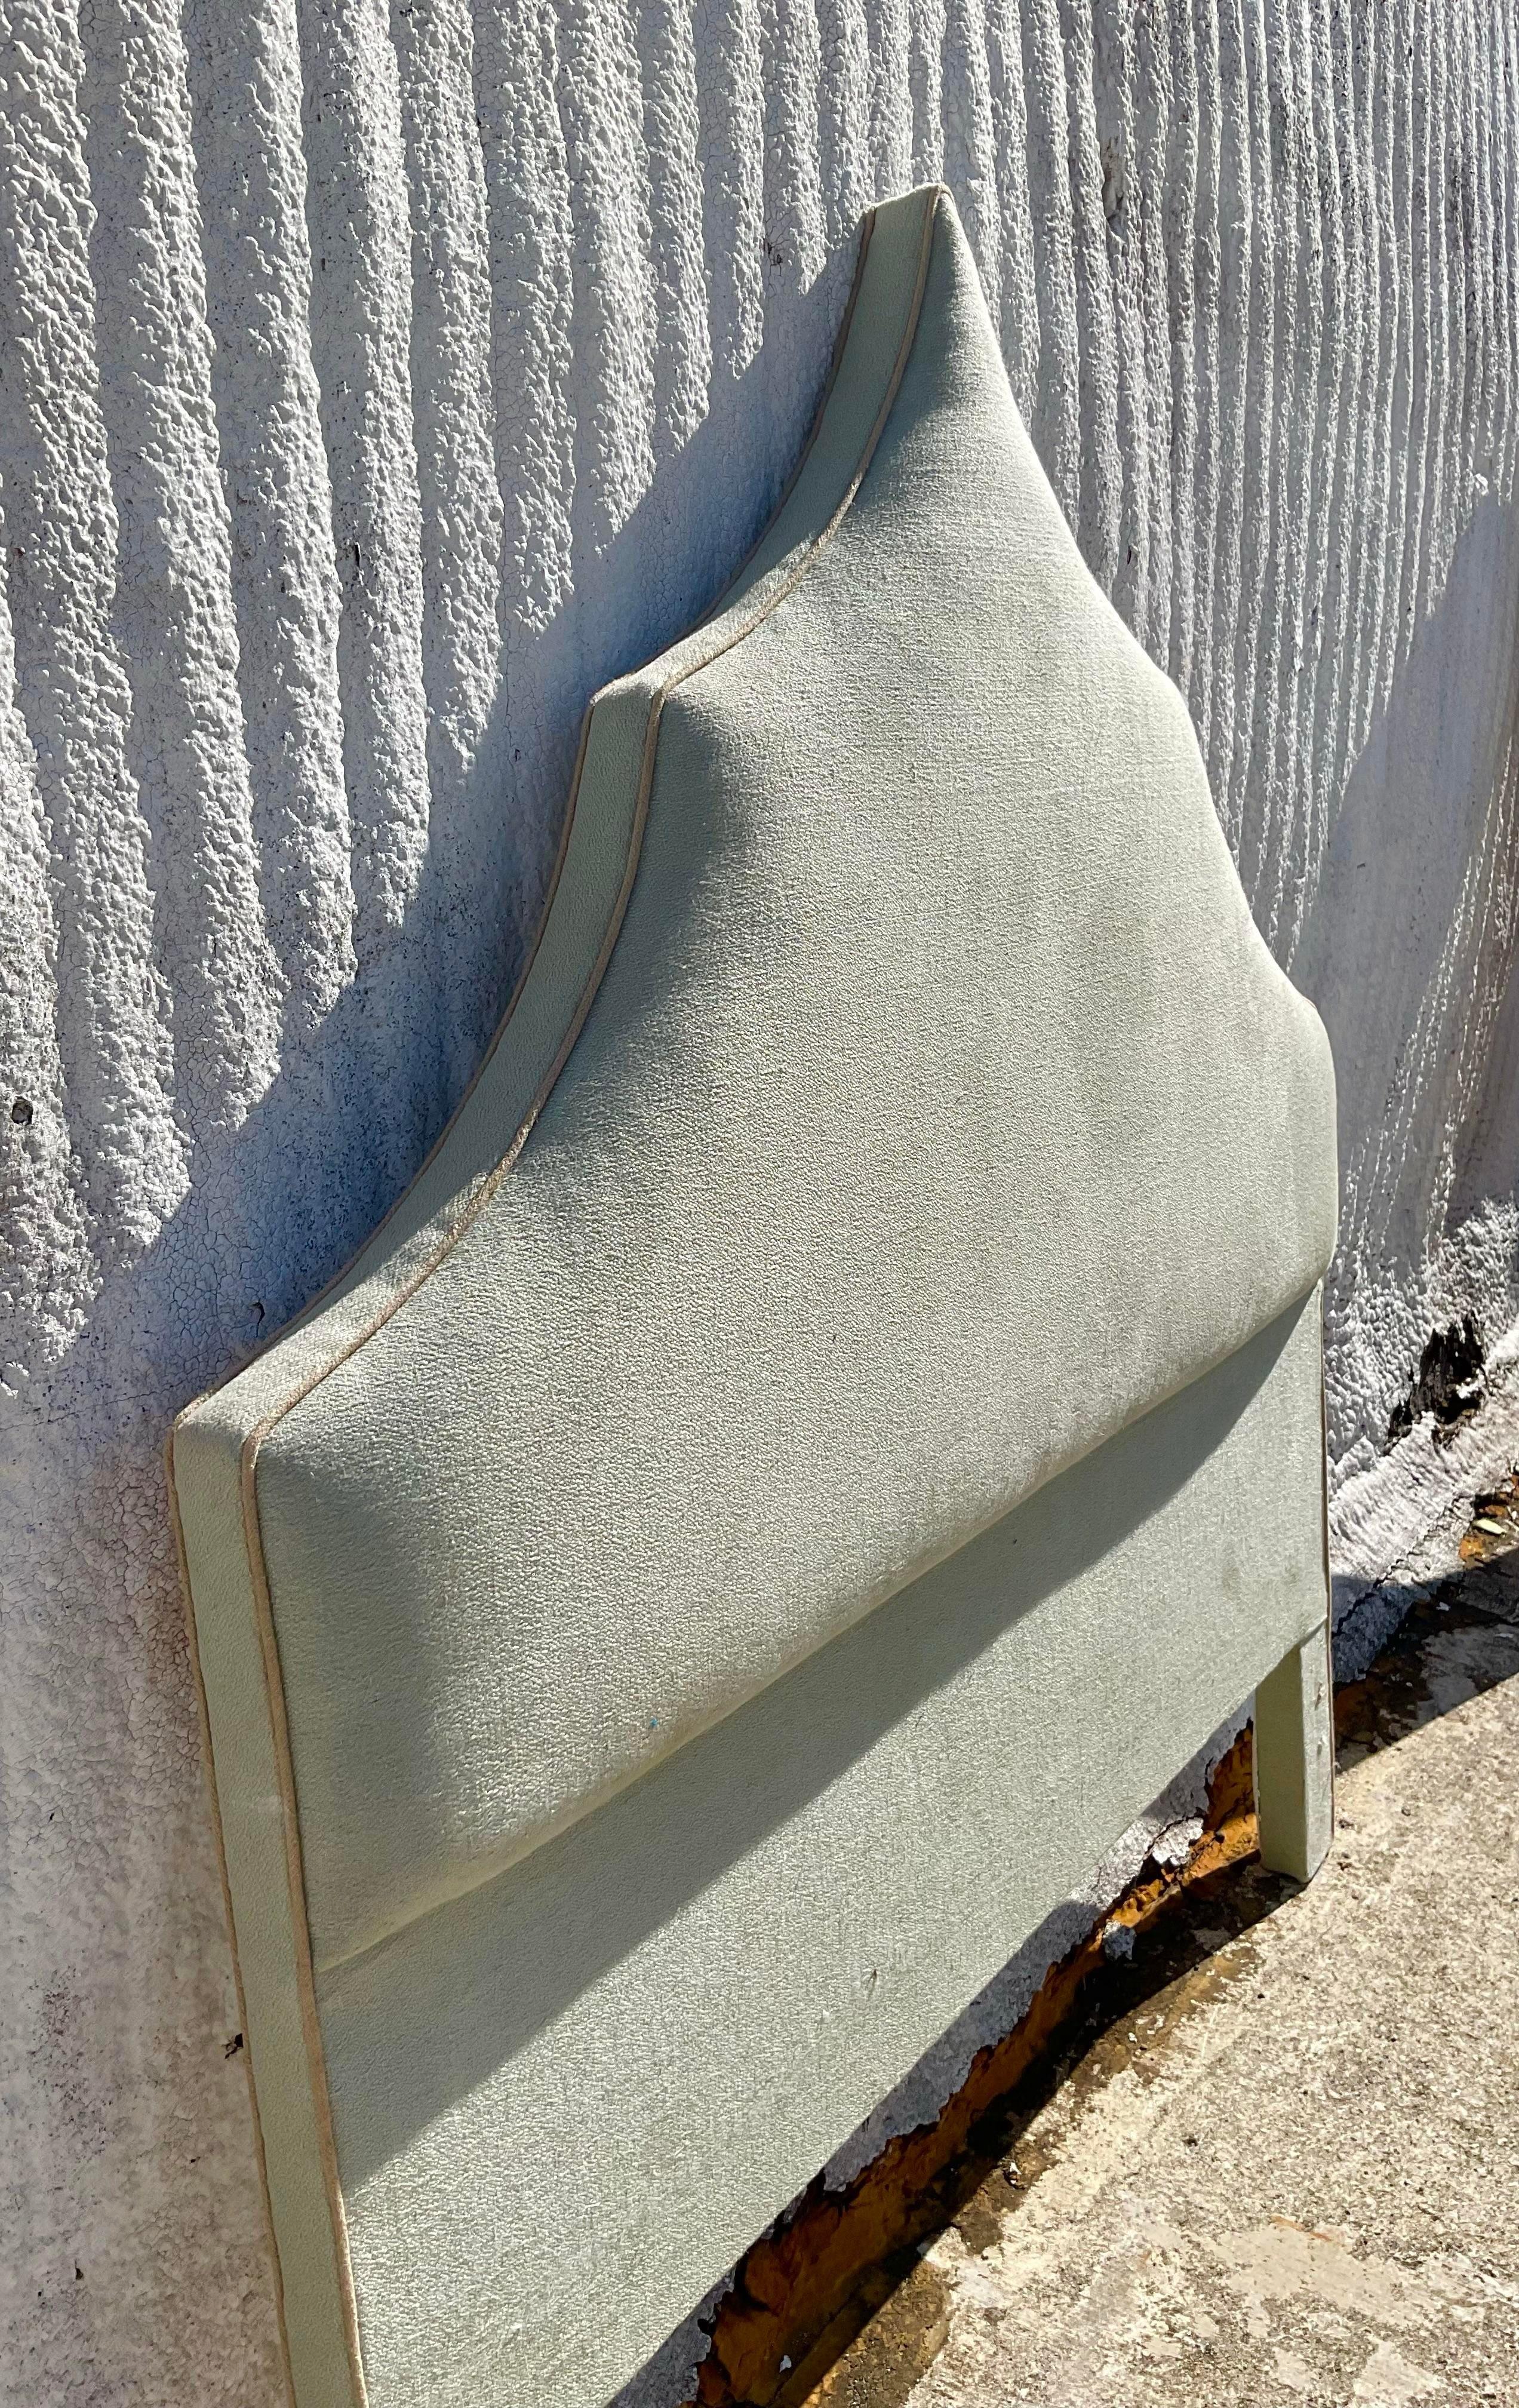 A lovely and unique vintage headboard that has been upholstered. The shape is truly one-of-a-kind. It will make your bedroom so chic. Acquired at a Palm Beach estate.